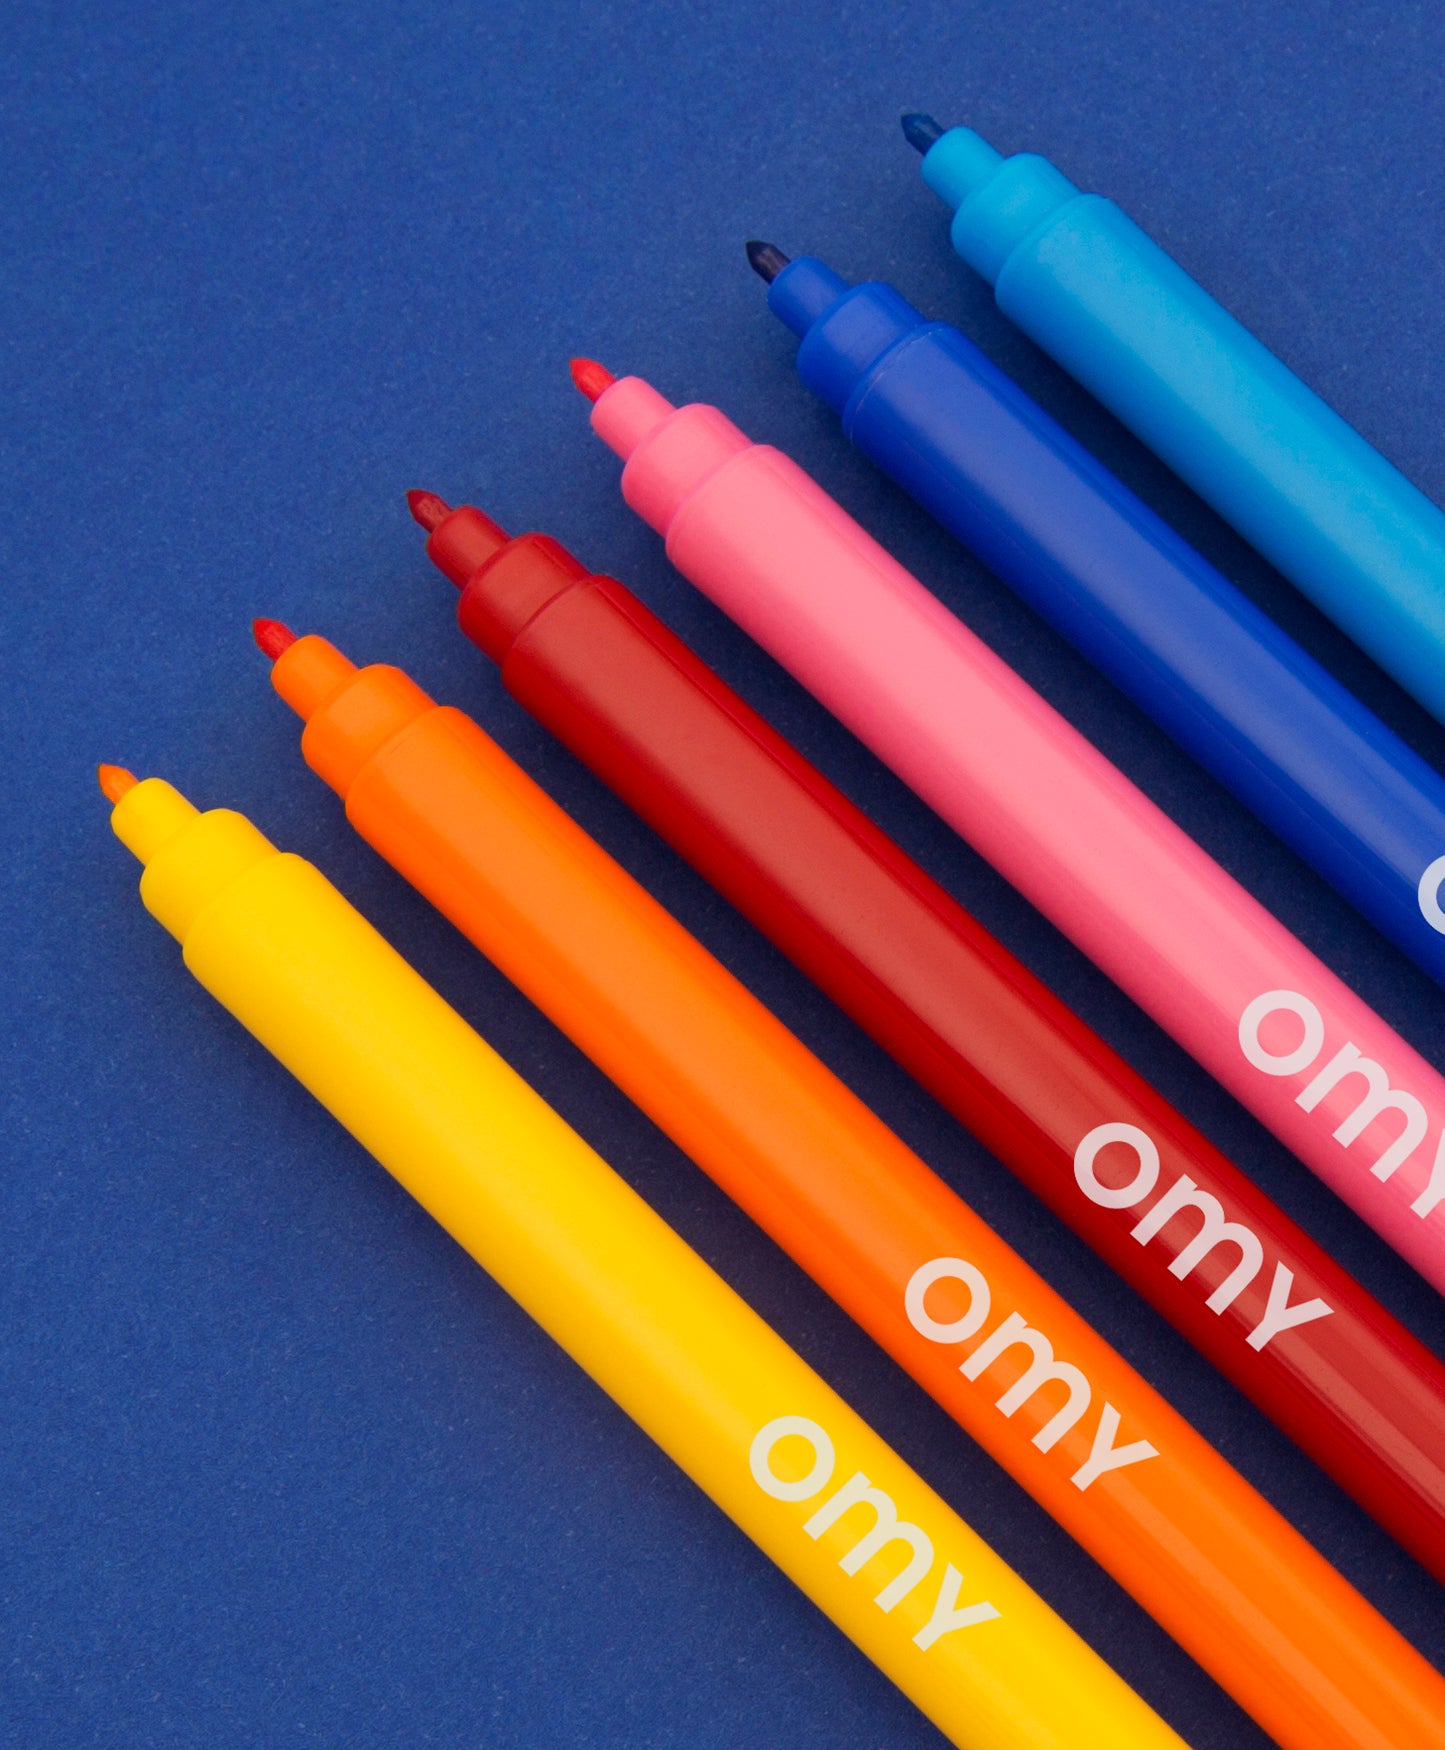 Ultra Washable Markers - 16 piezas